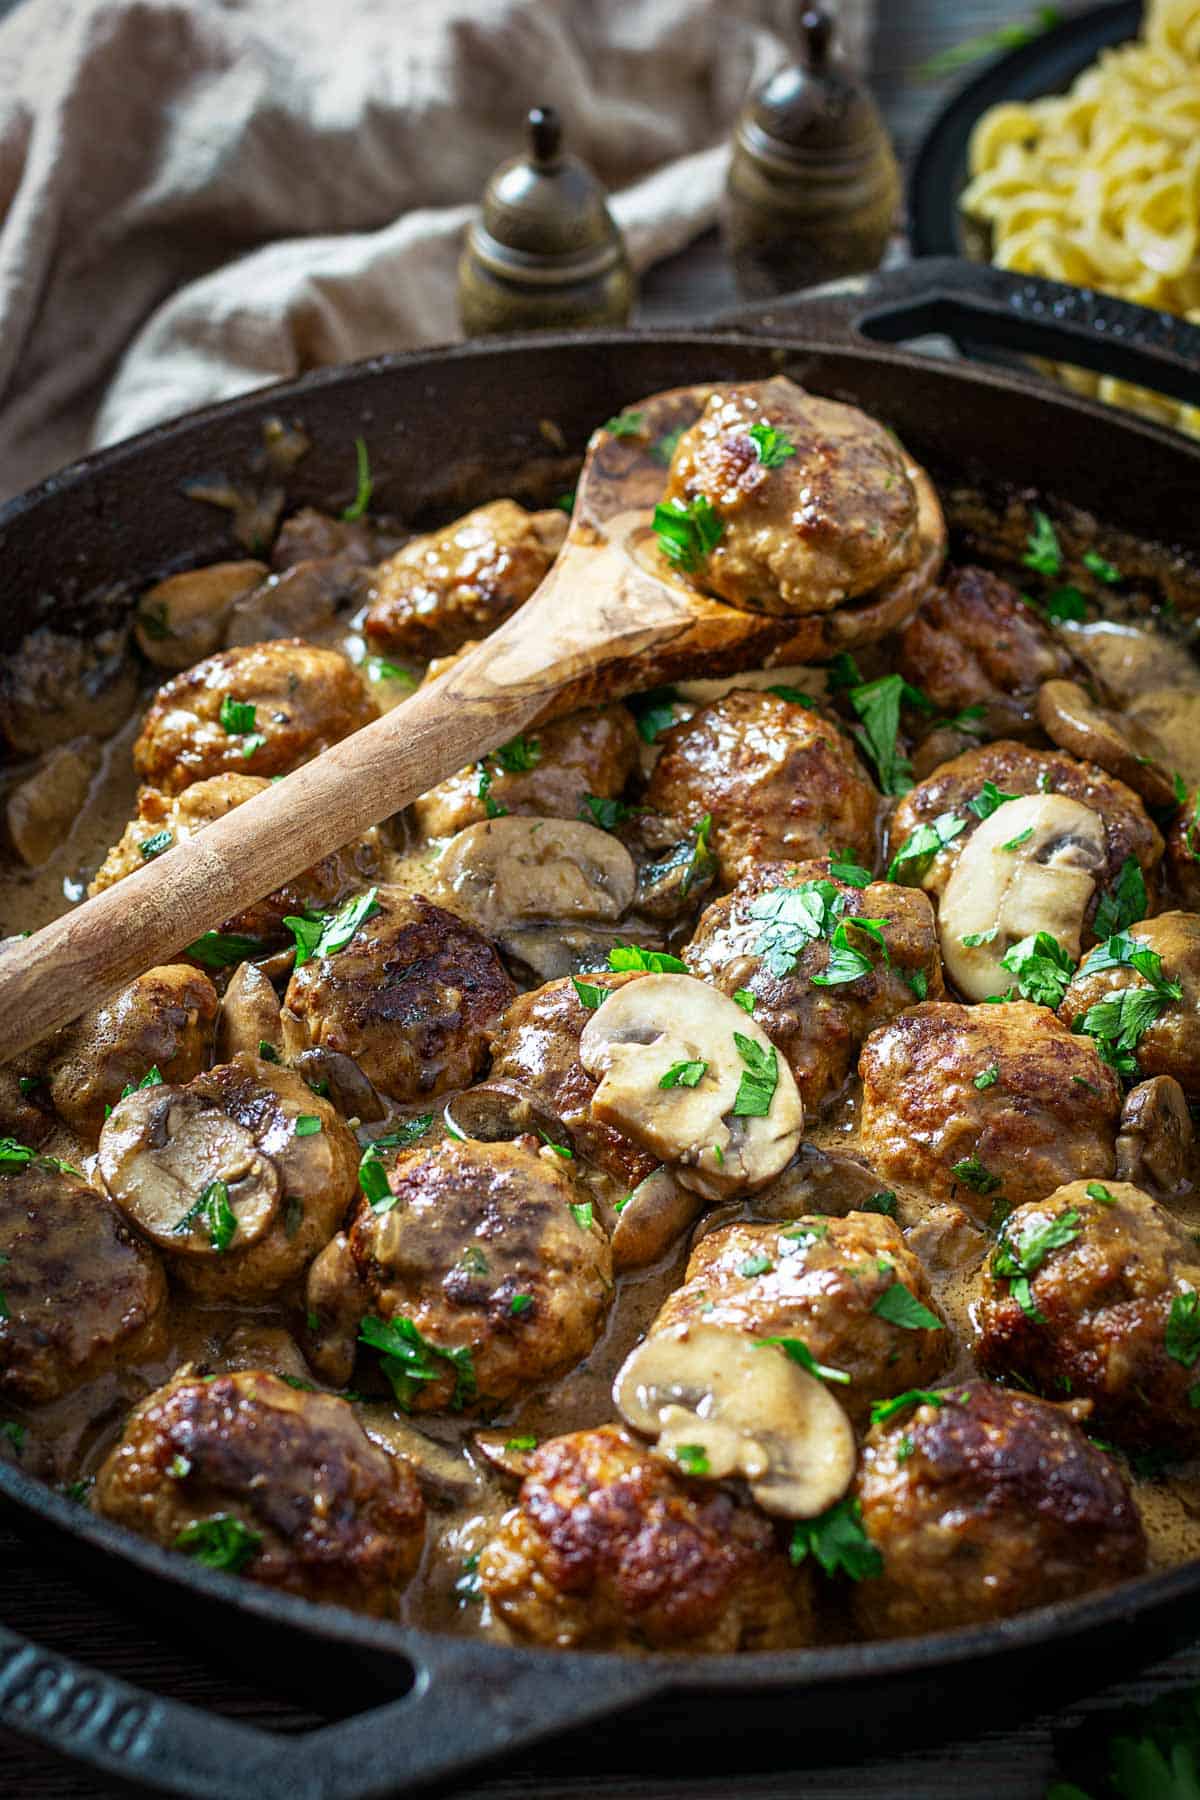 Meatballs in a cast-iron skillet with mushroom sauce and a wooden spoon.